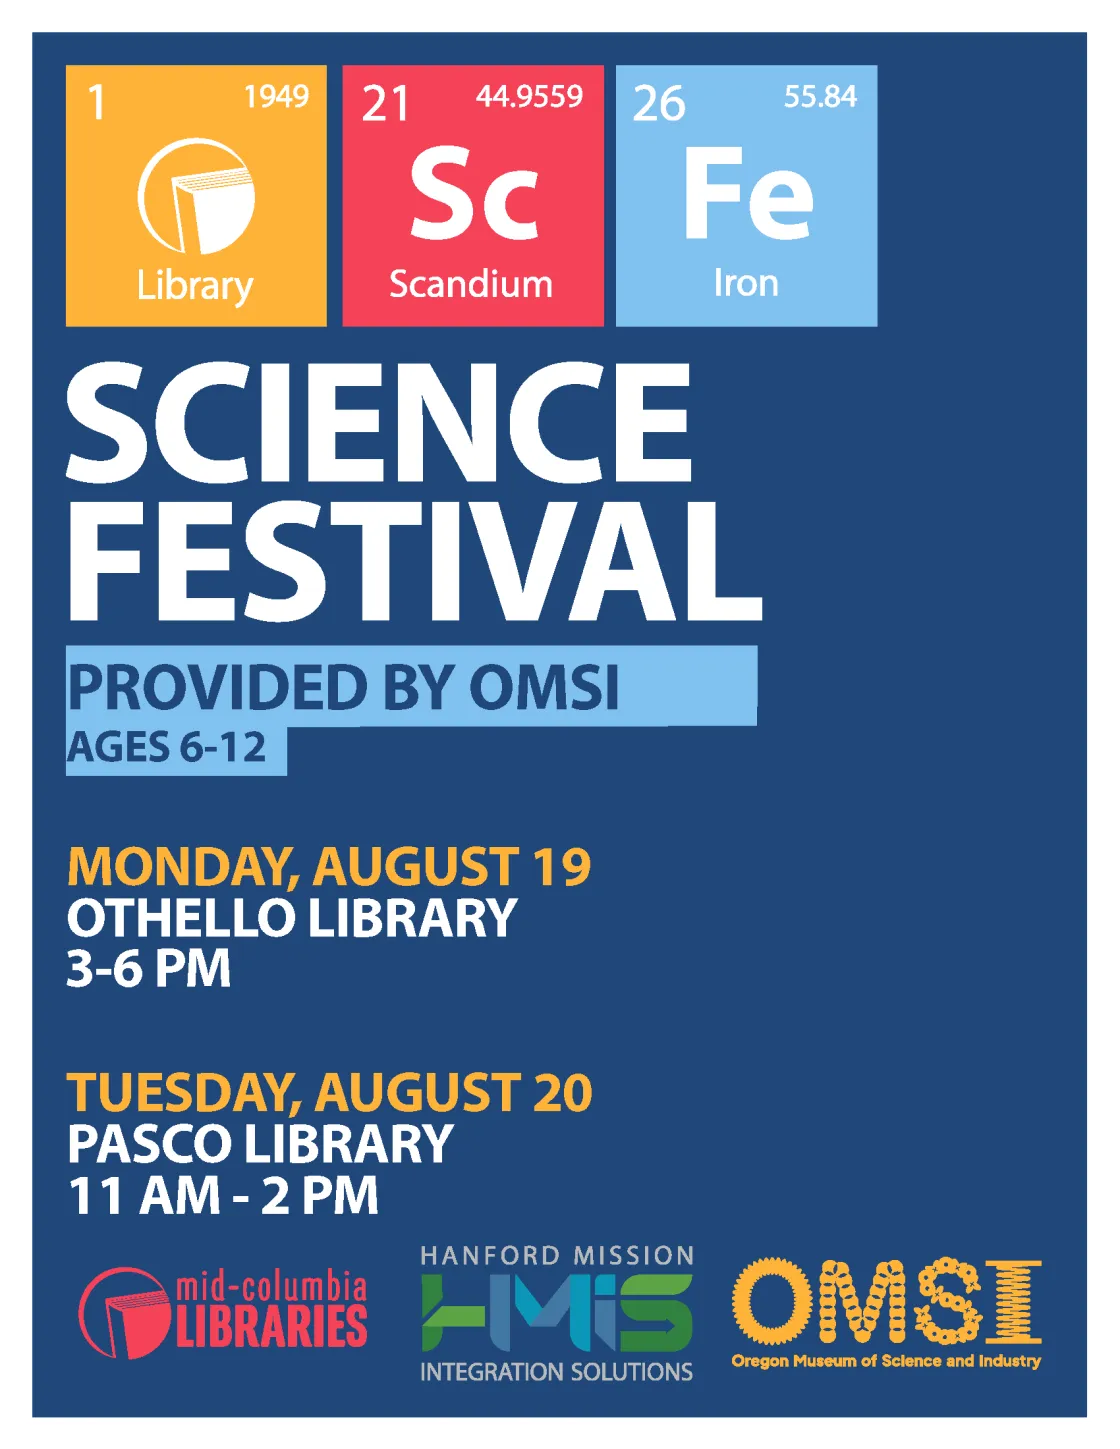 Poster with information about the Science Festival.